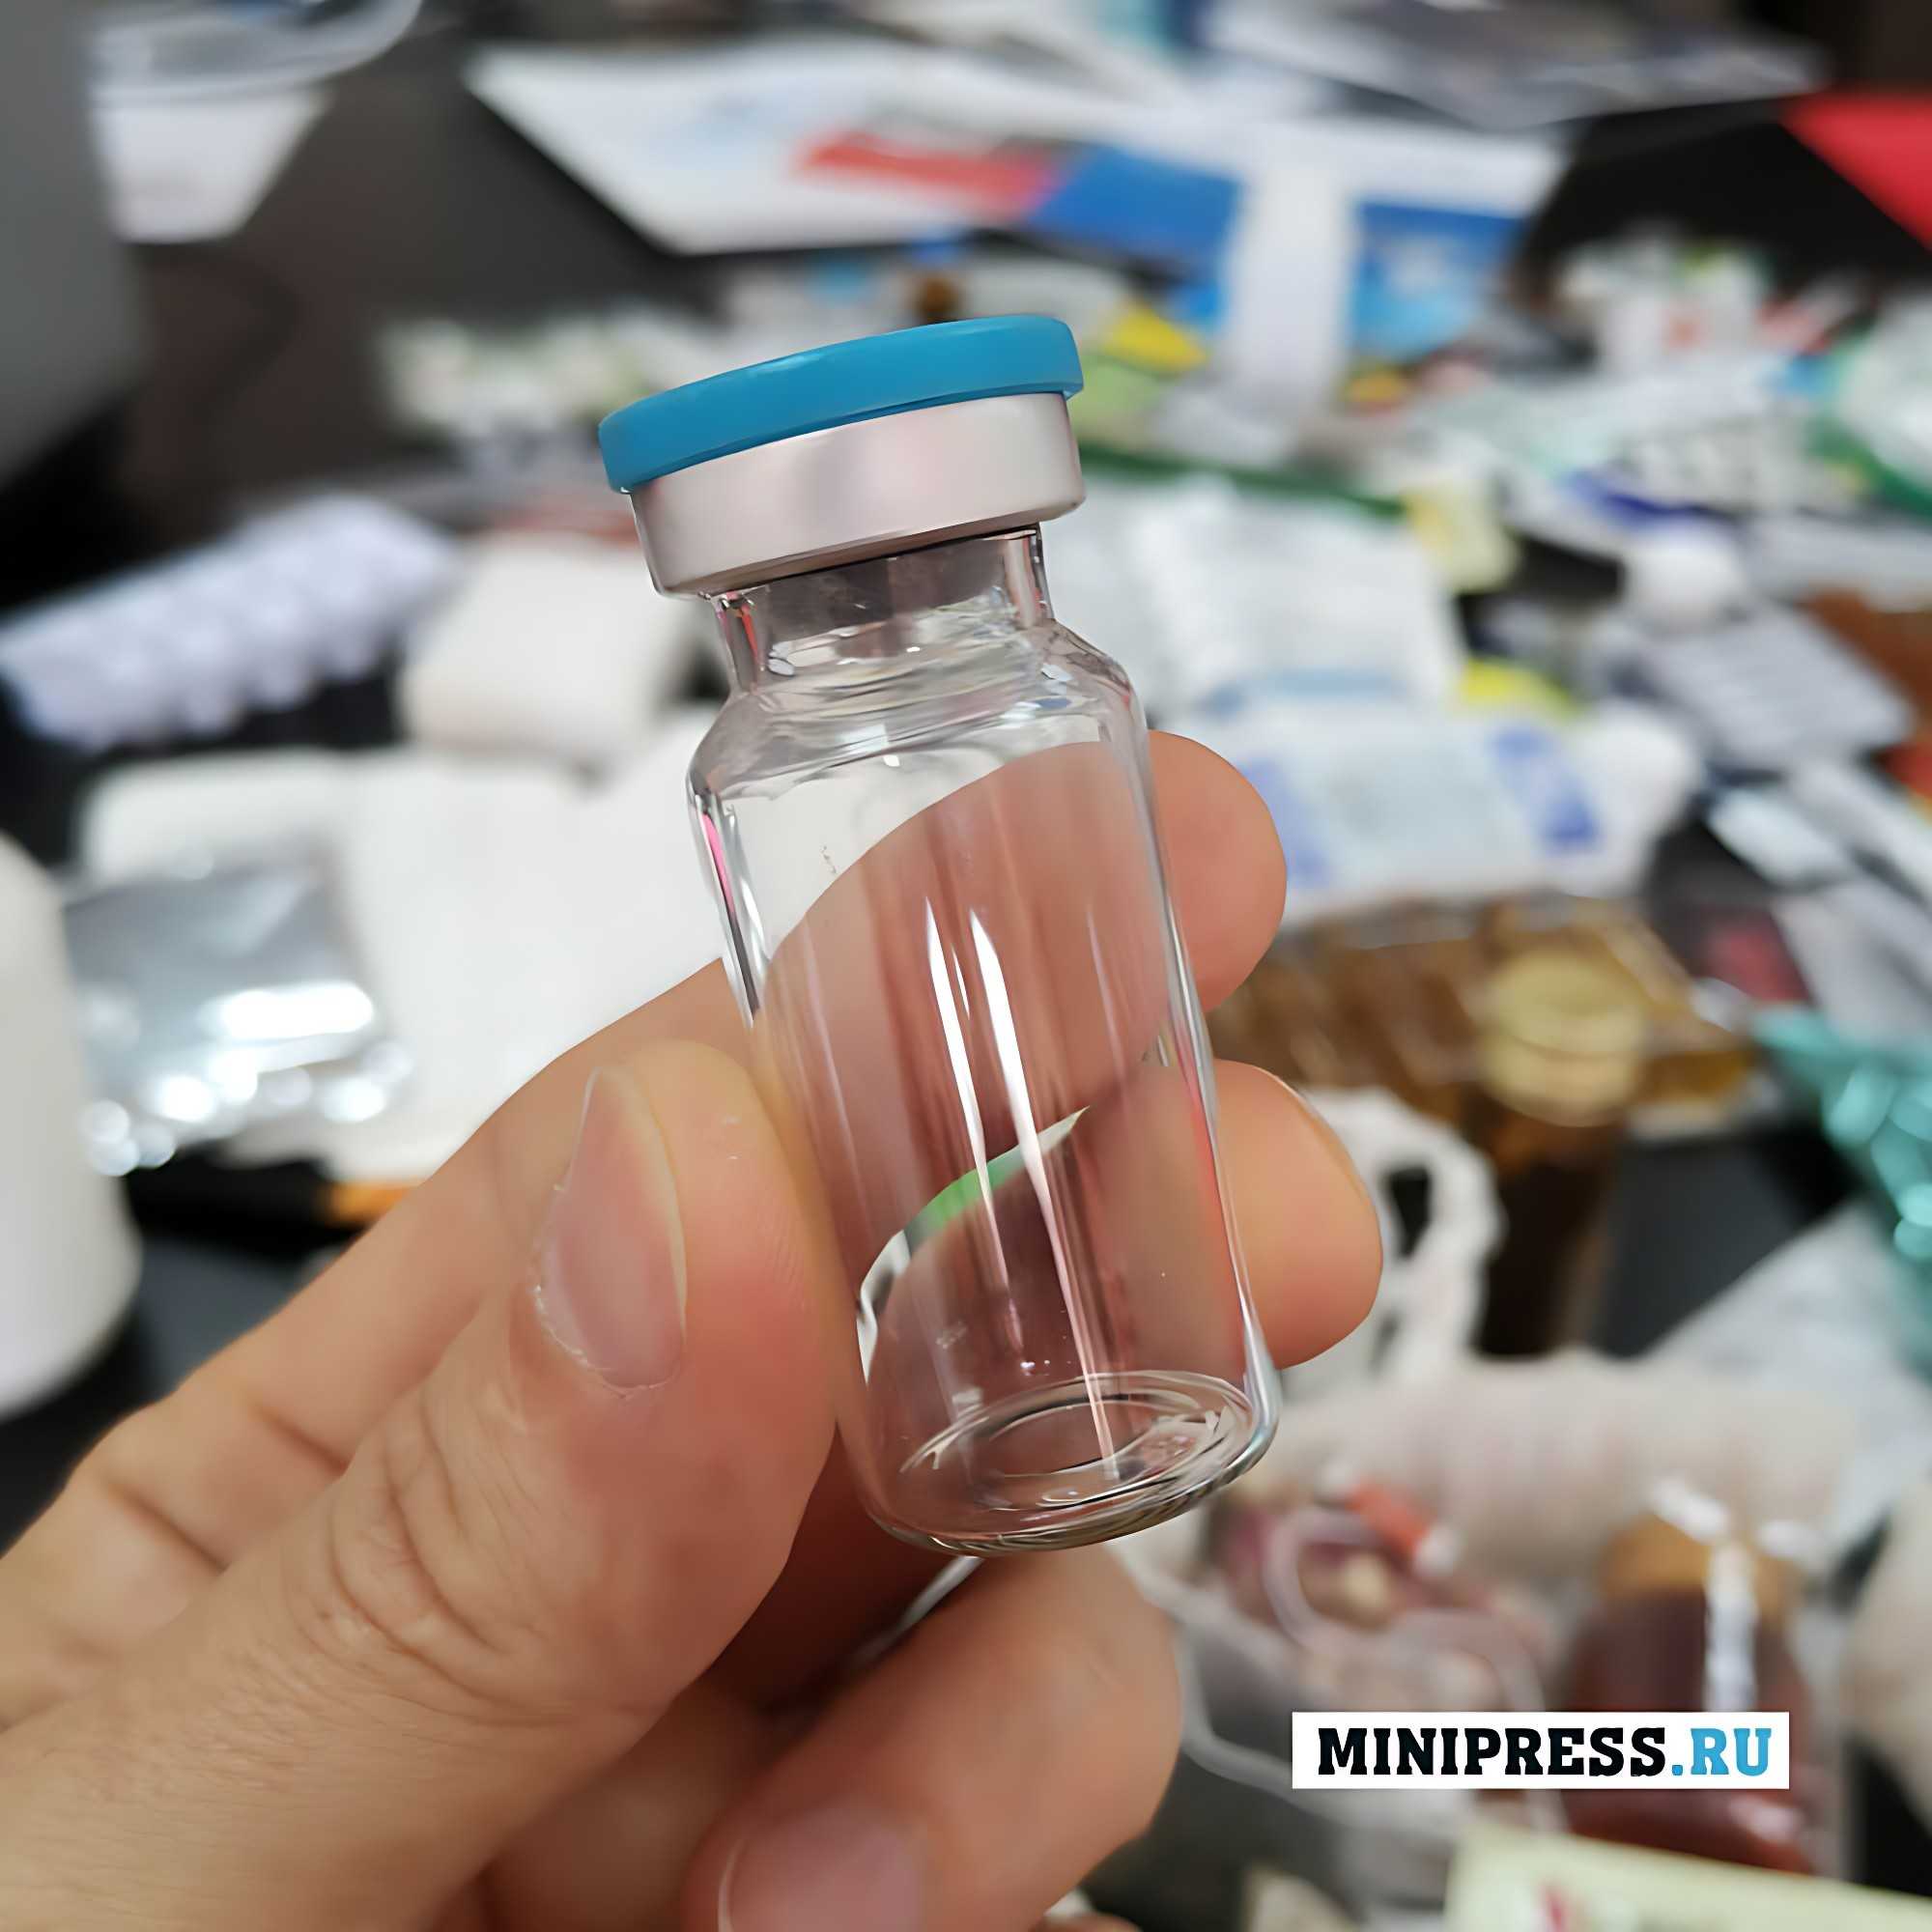 Filling and capping of vials